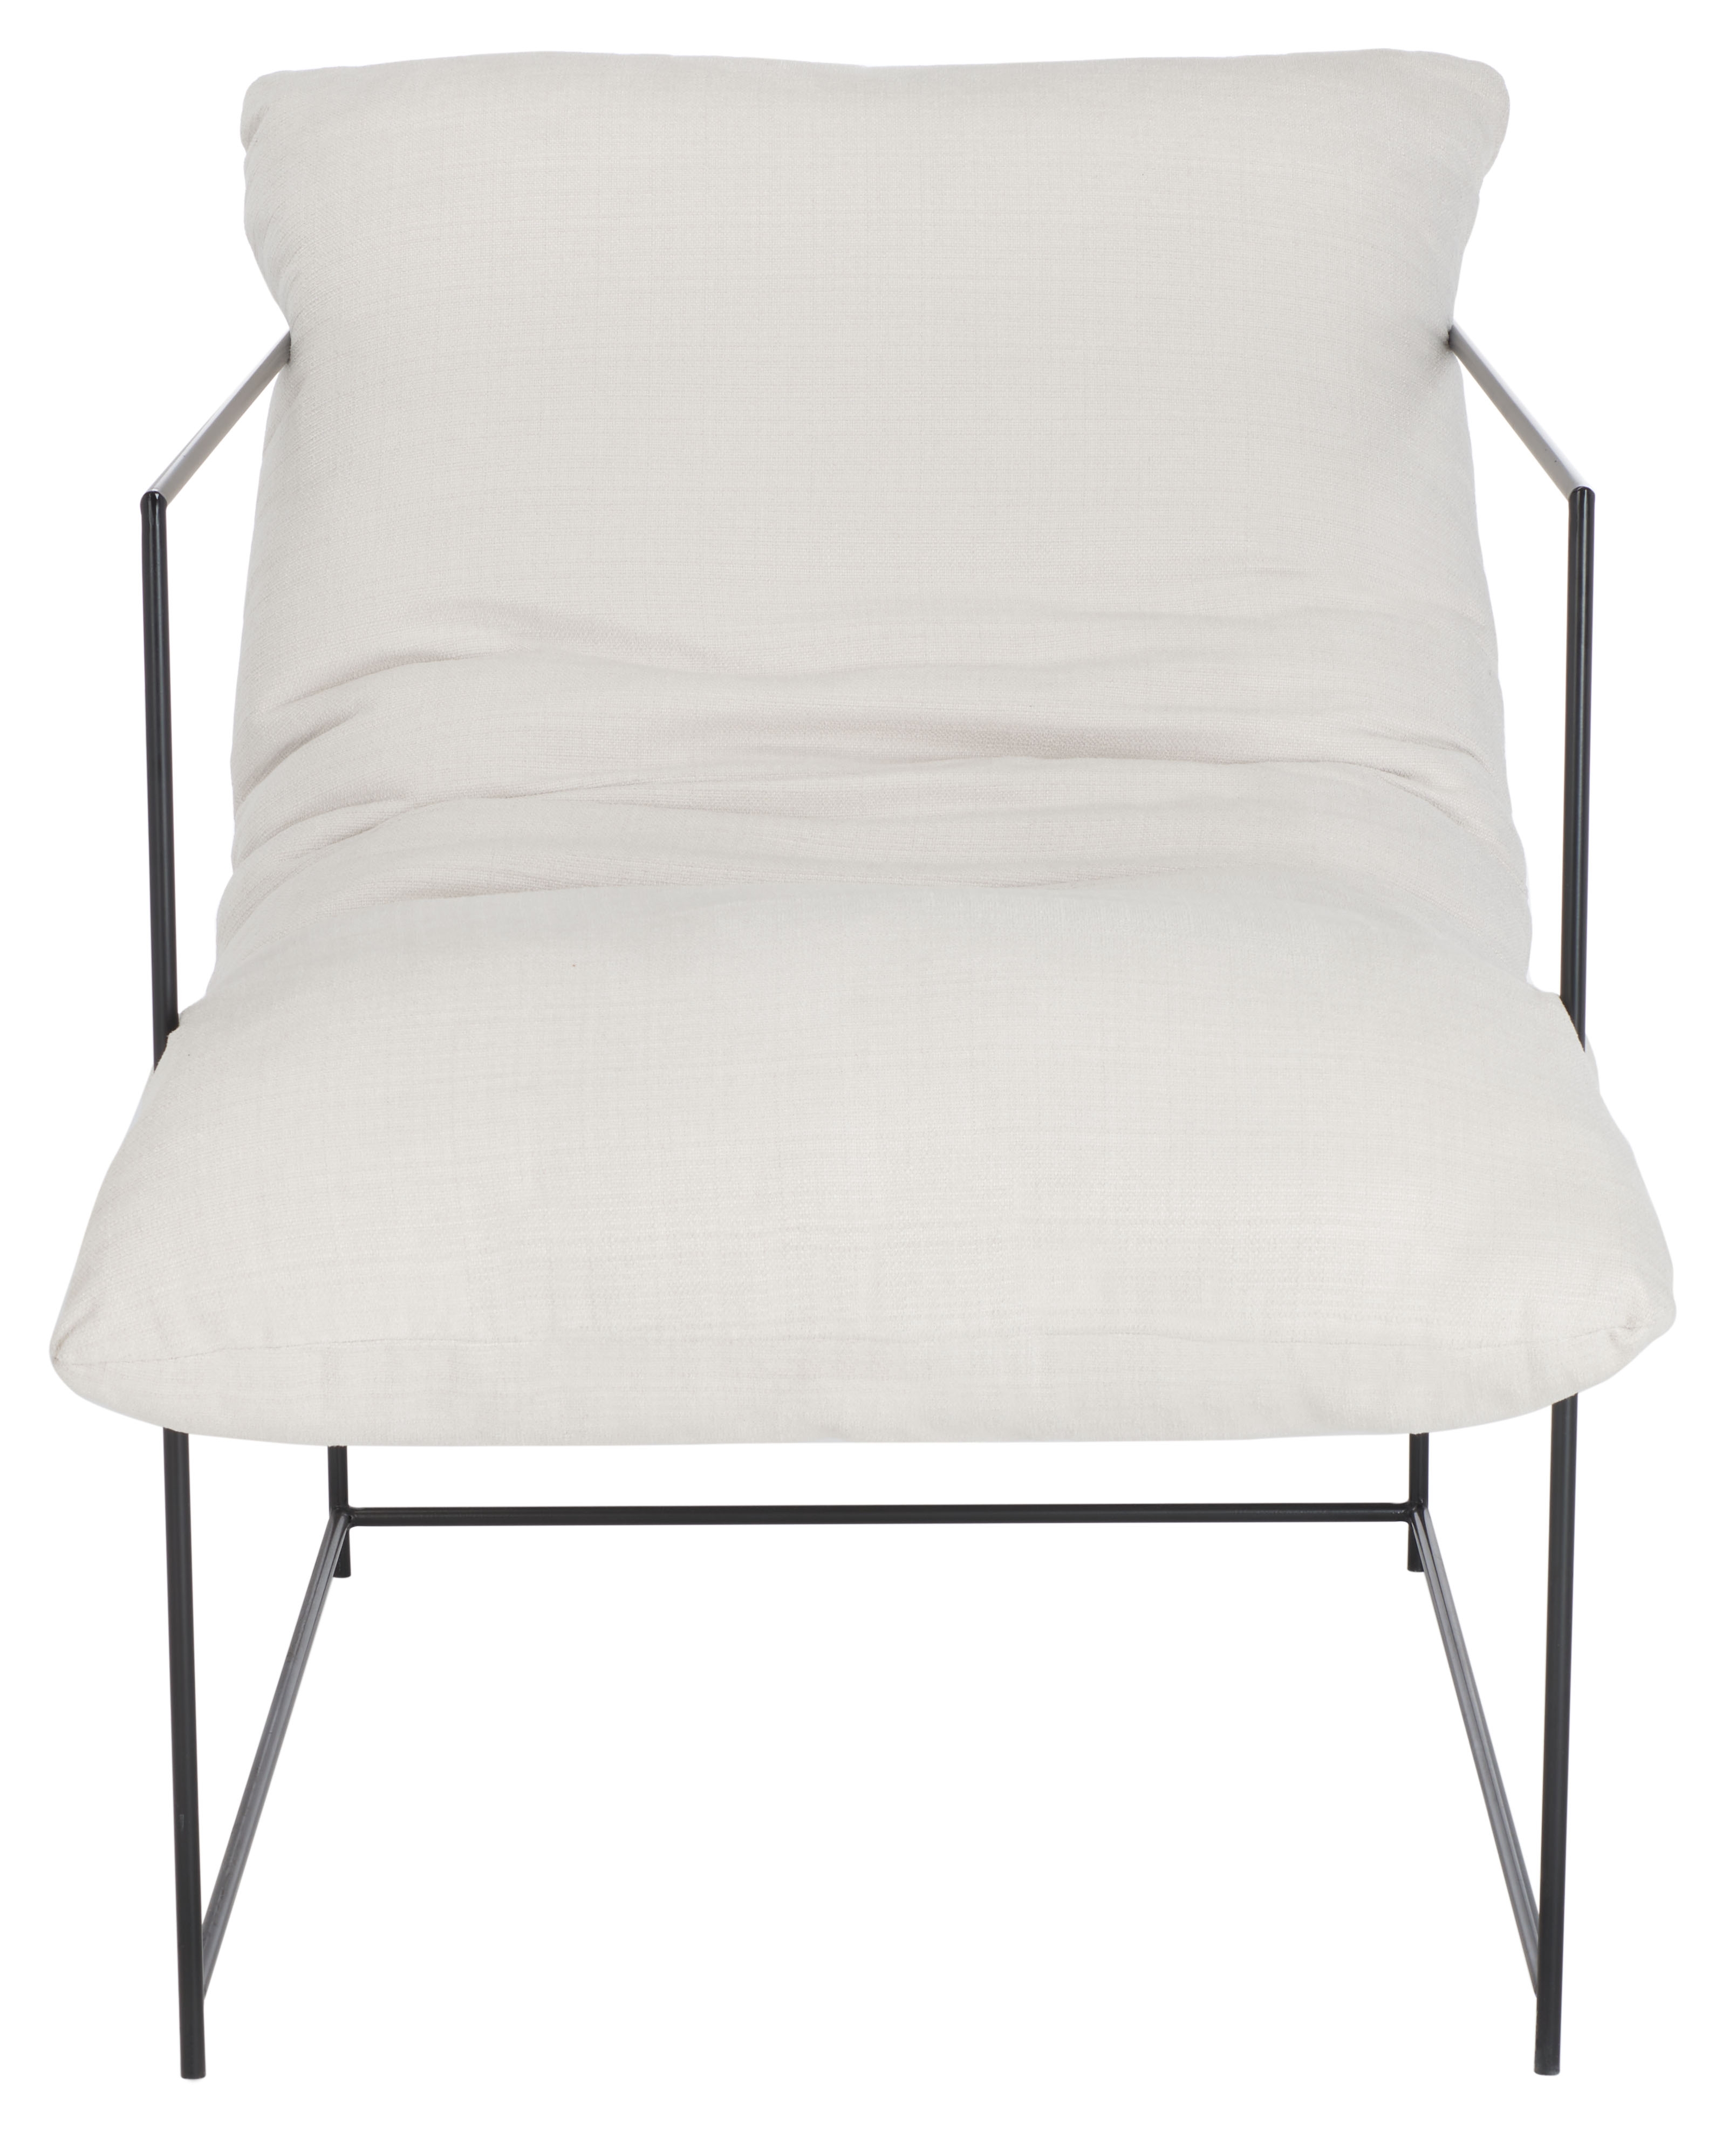 Portland Pillow Top Accent Chair - Ivory/Black - Safavieh - Image 1